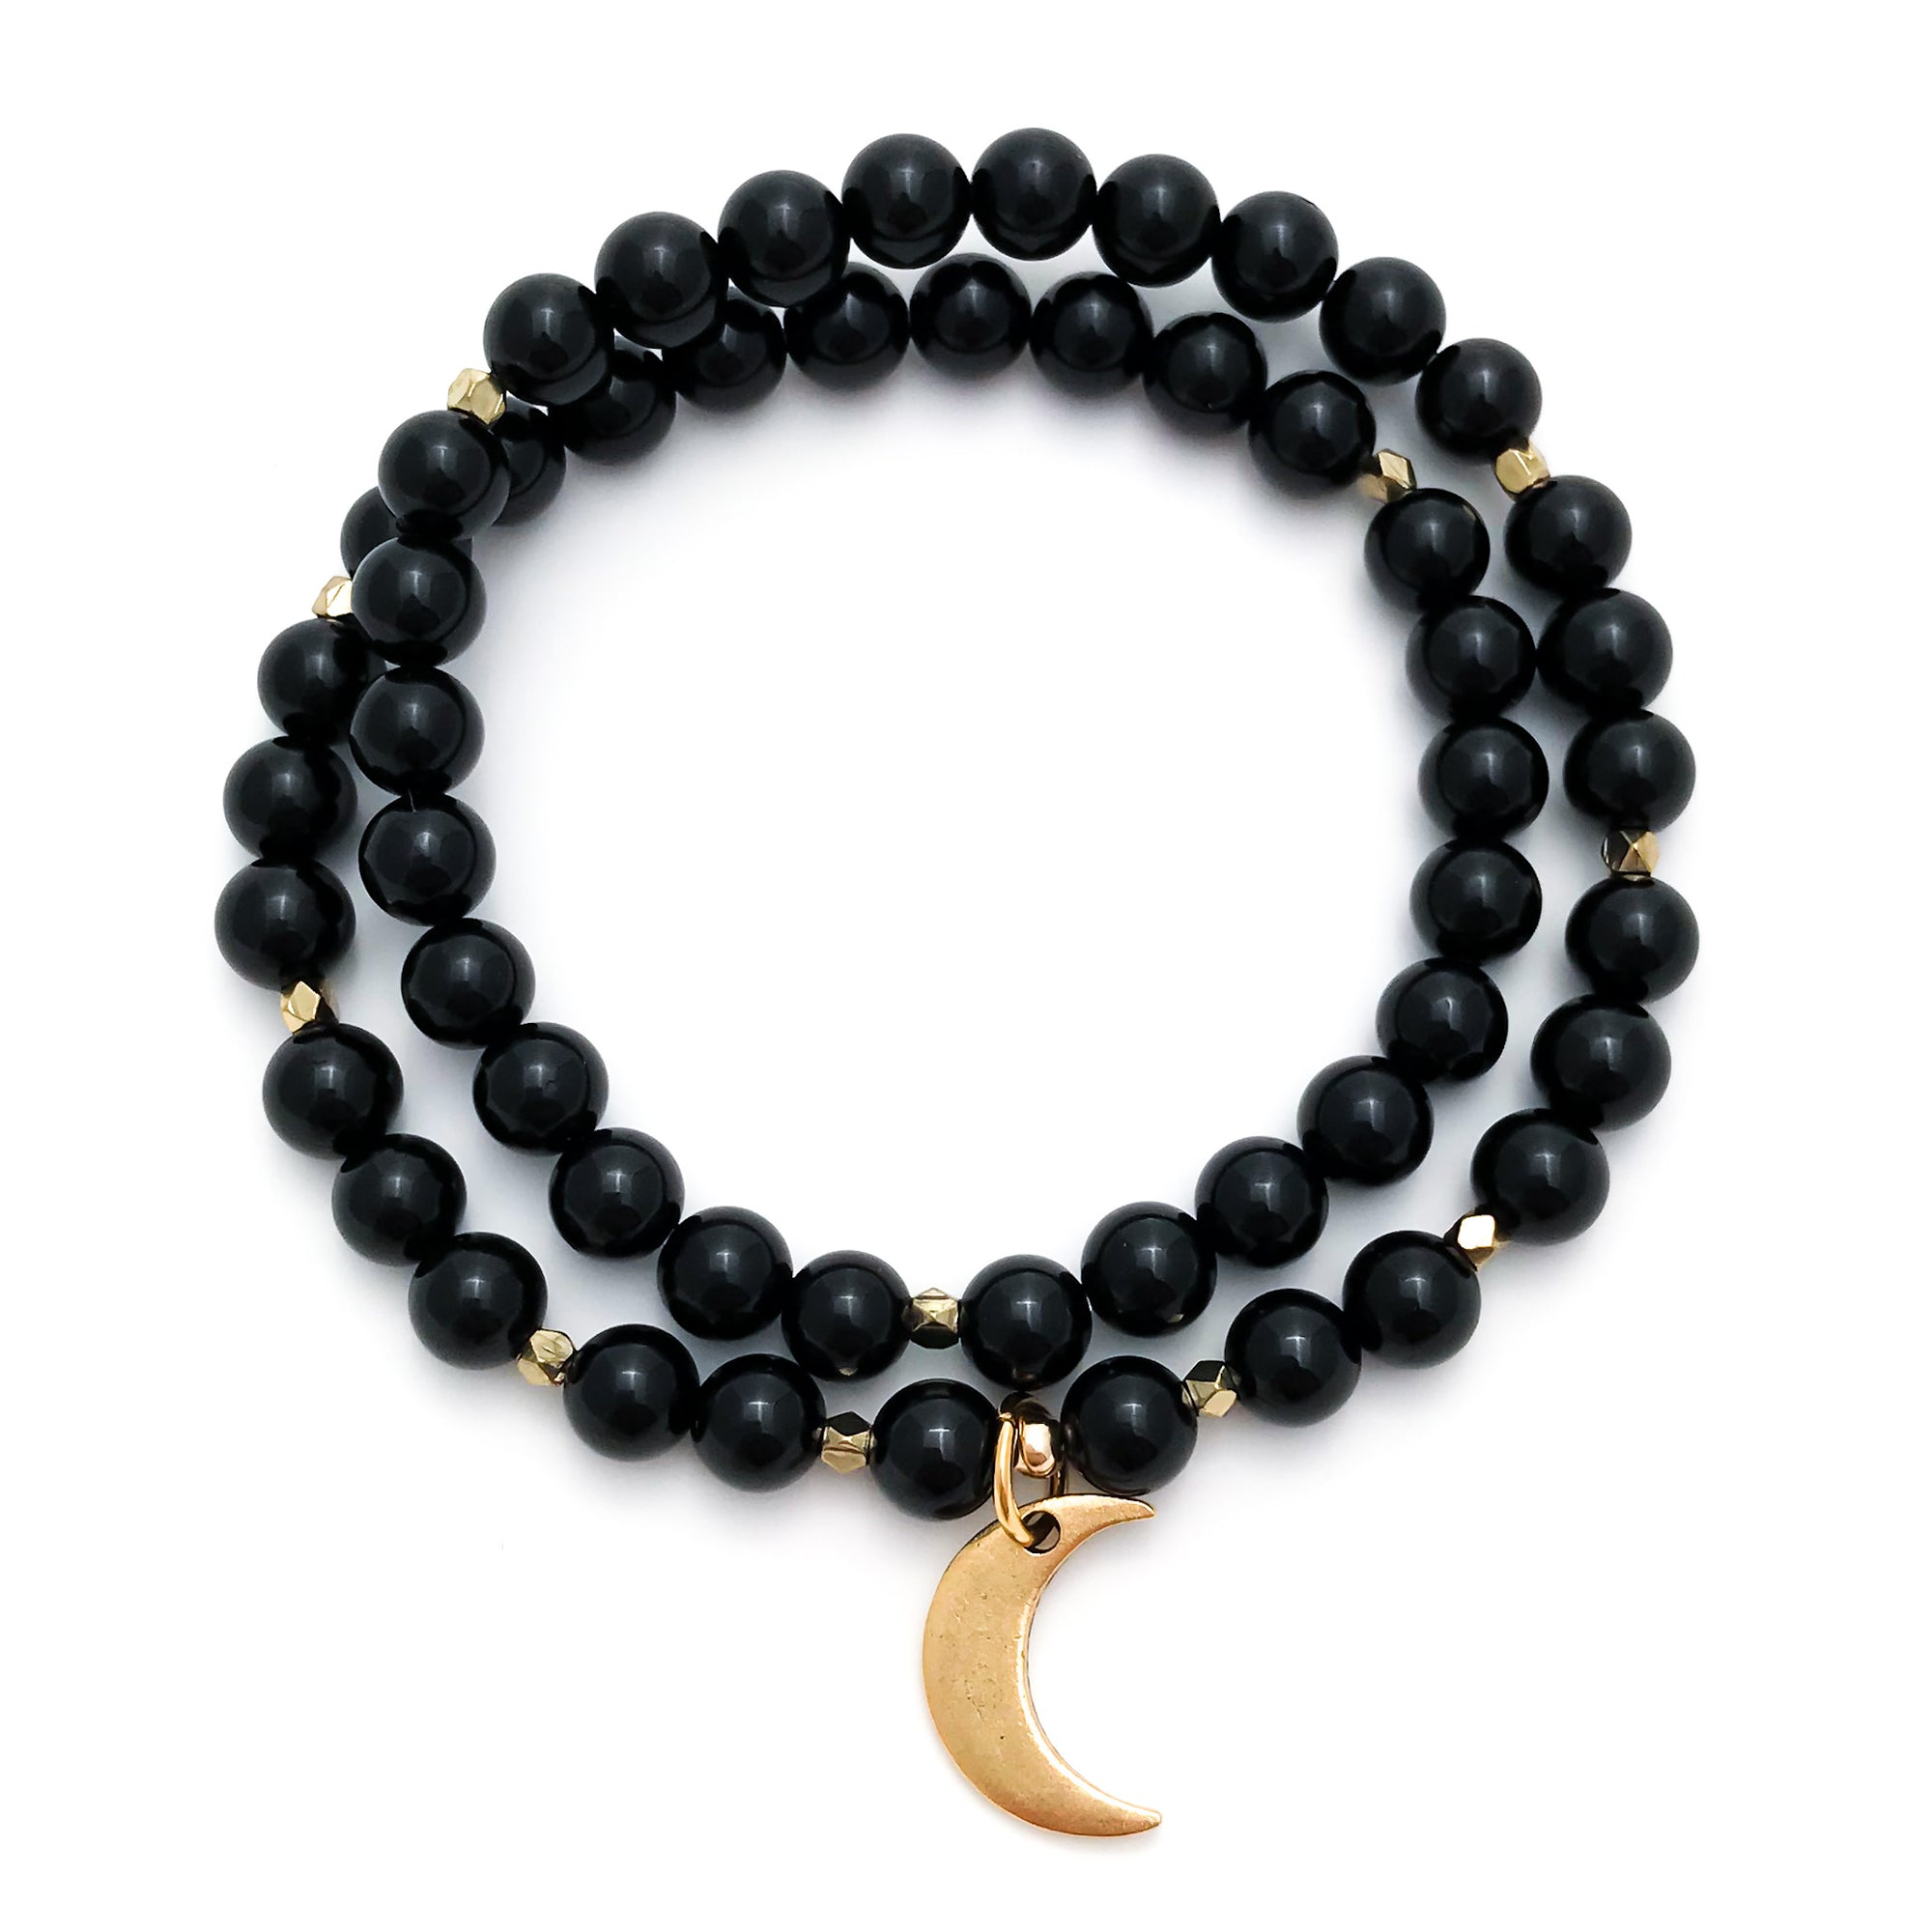 LUNA : Black Tourmaline Mala Wrap Bracelet with gold Crescent Moon and diamond cut accents. Yoga jewelry black beaded bracelet made with natural gemstone.